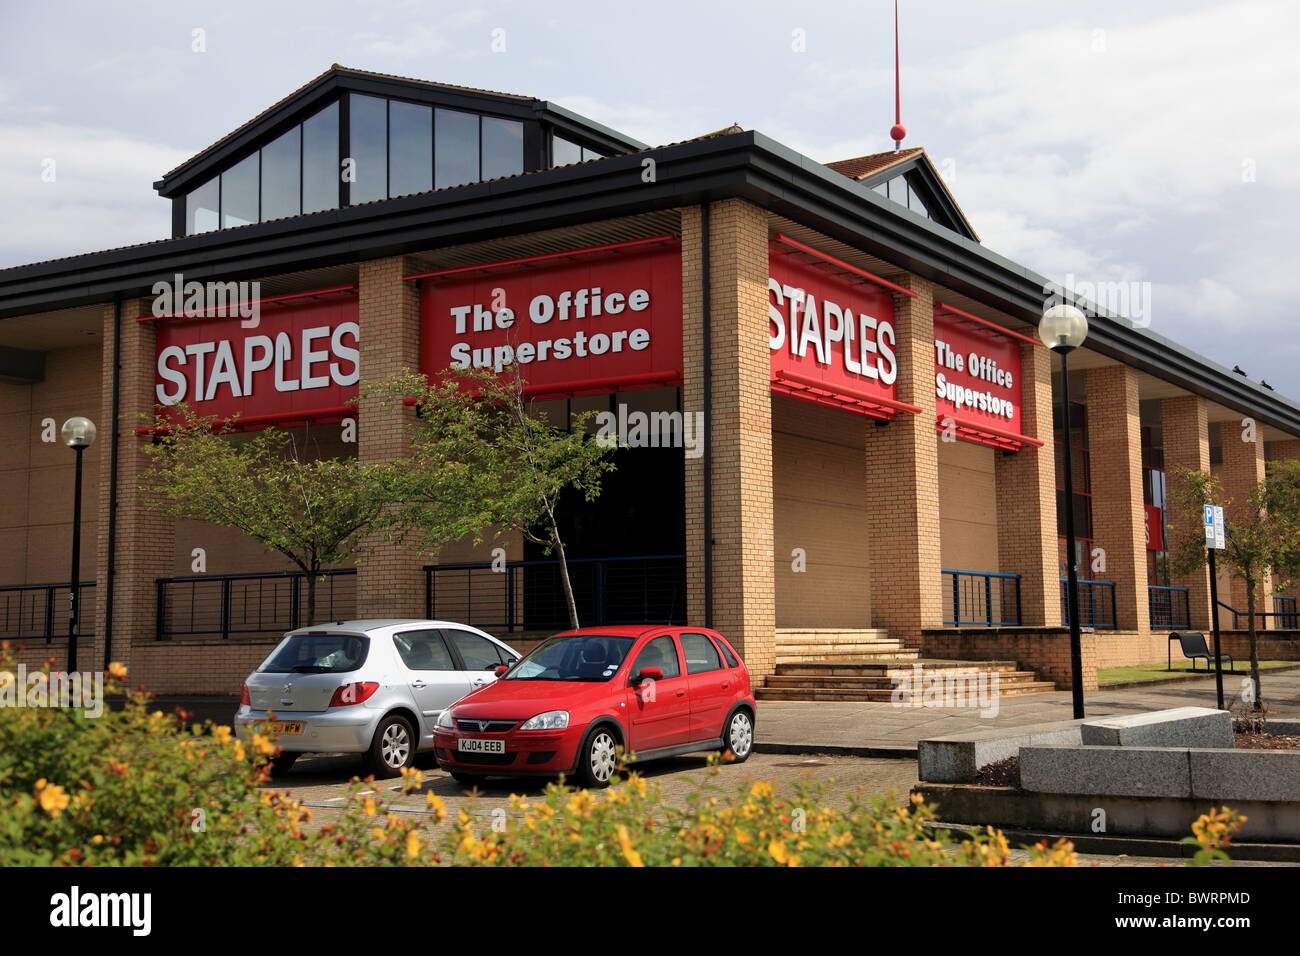 Staples, retailer of office products, hypergrowth store at Milton Keynes, Buckinghamshire, England, UK Stock Photo